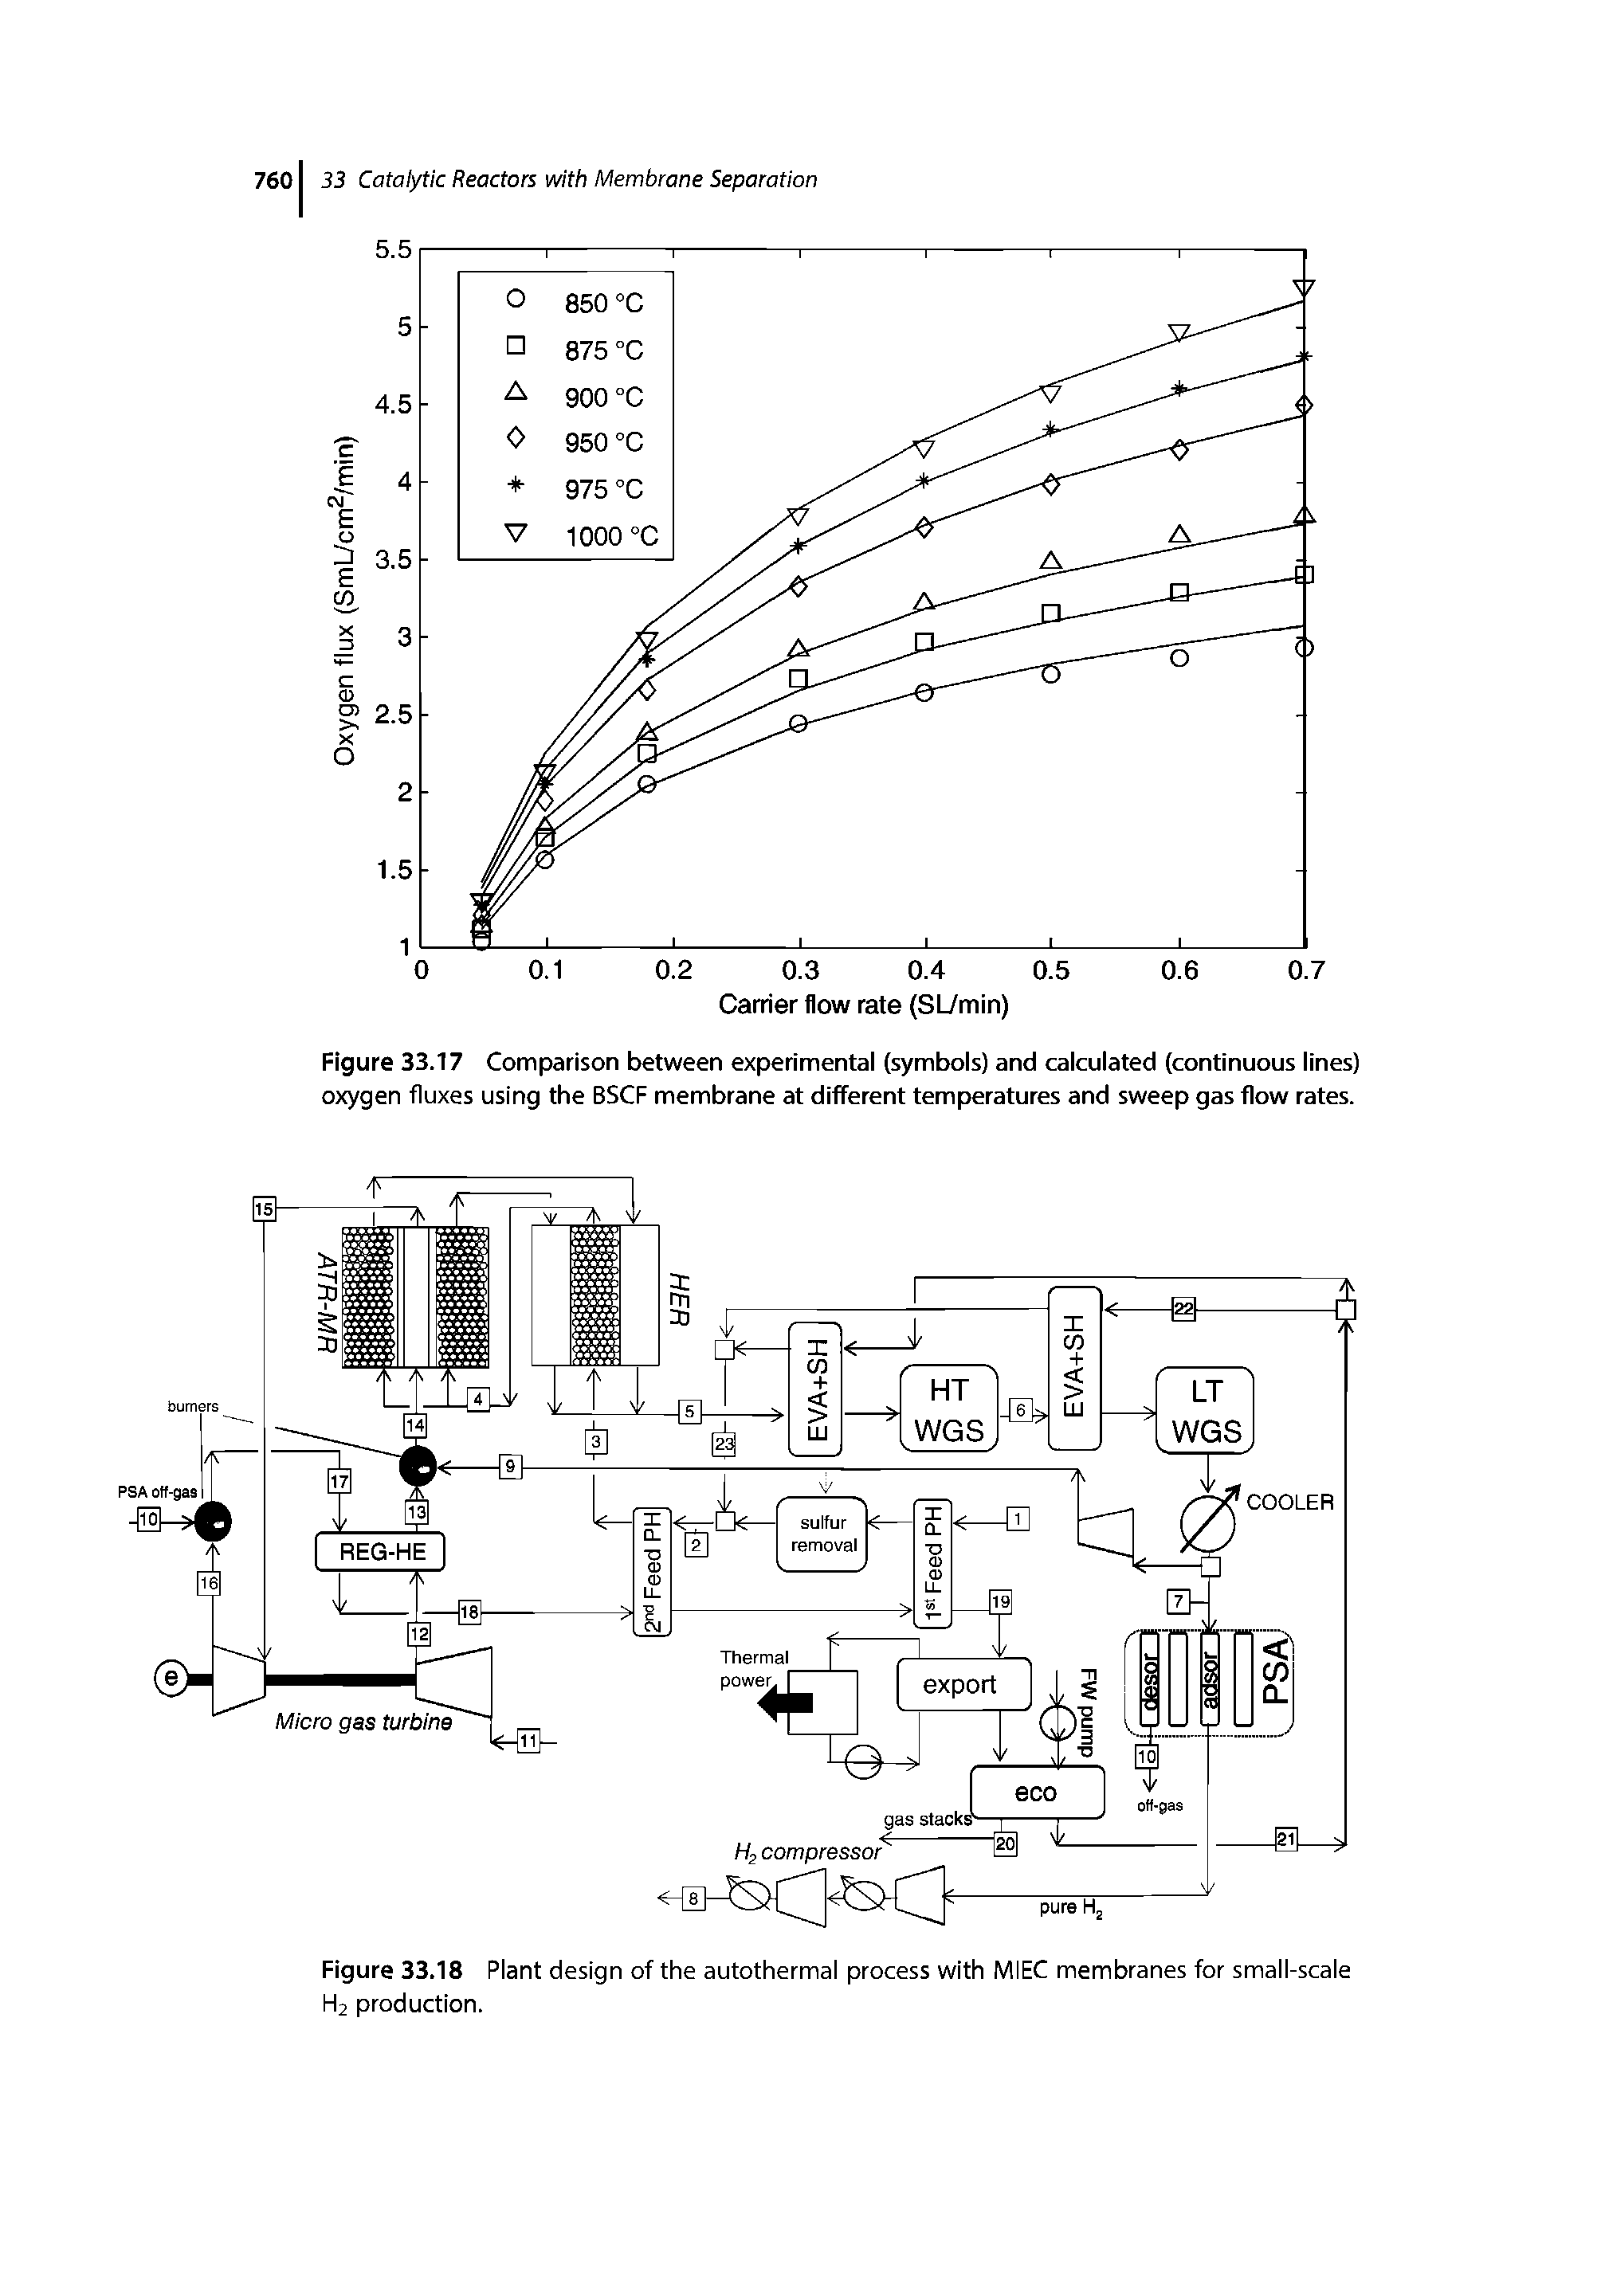 Figure 33.17 Comparison between experimental (symbols) and calculated (continuous lines) oxygen fluxes using the BSCF membrane at different temperatures and sweep gas flow rates.